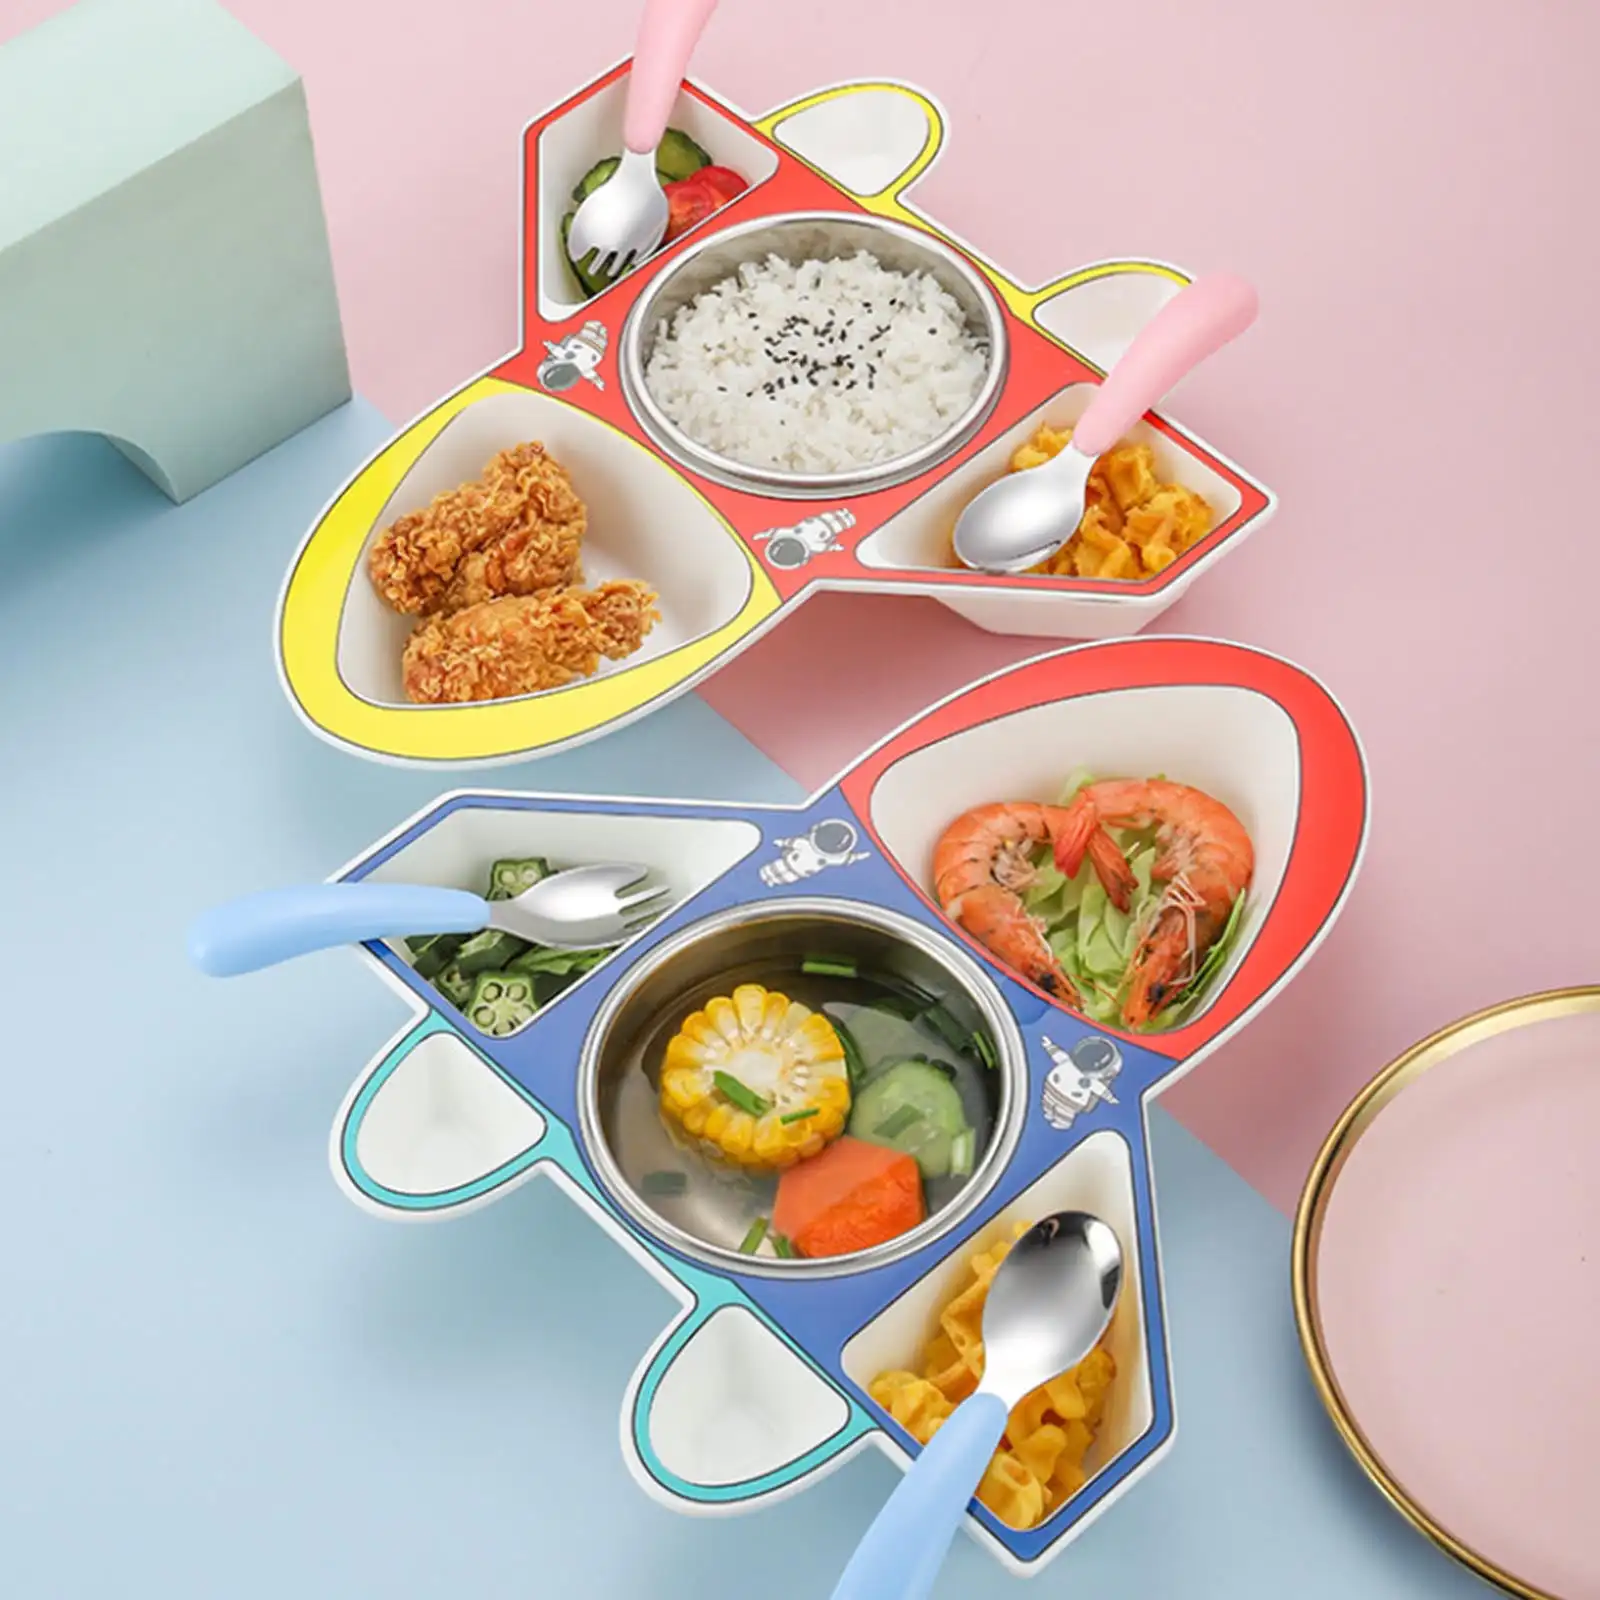 

Children's Plate Removable Aircraft Stainless Steel Grid Plate Kids Breakfast Dinner Dinnerware Baby Food Feeding Dishes Tray